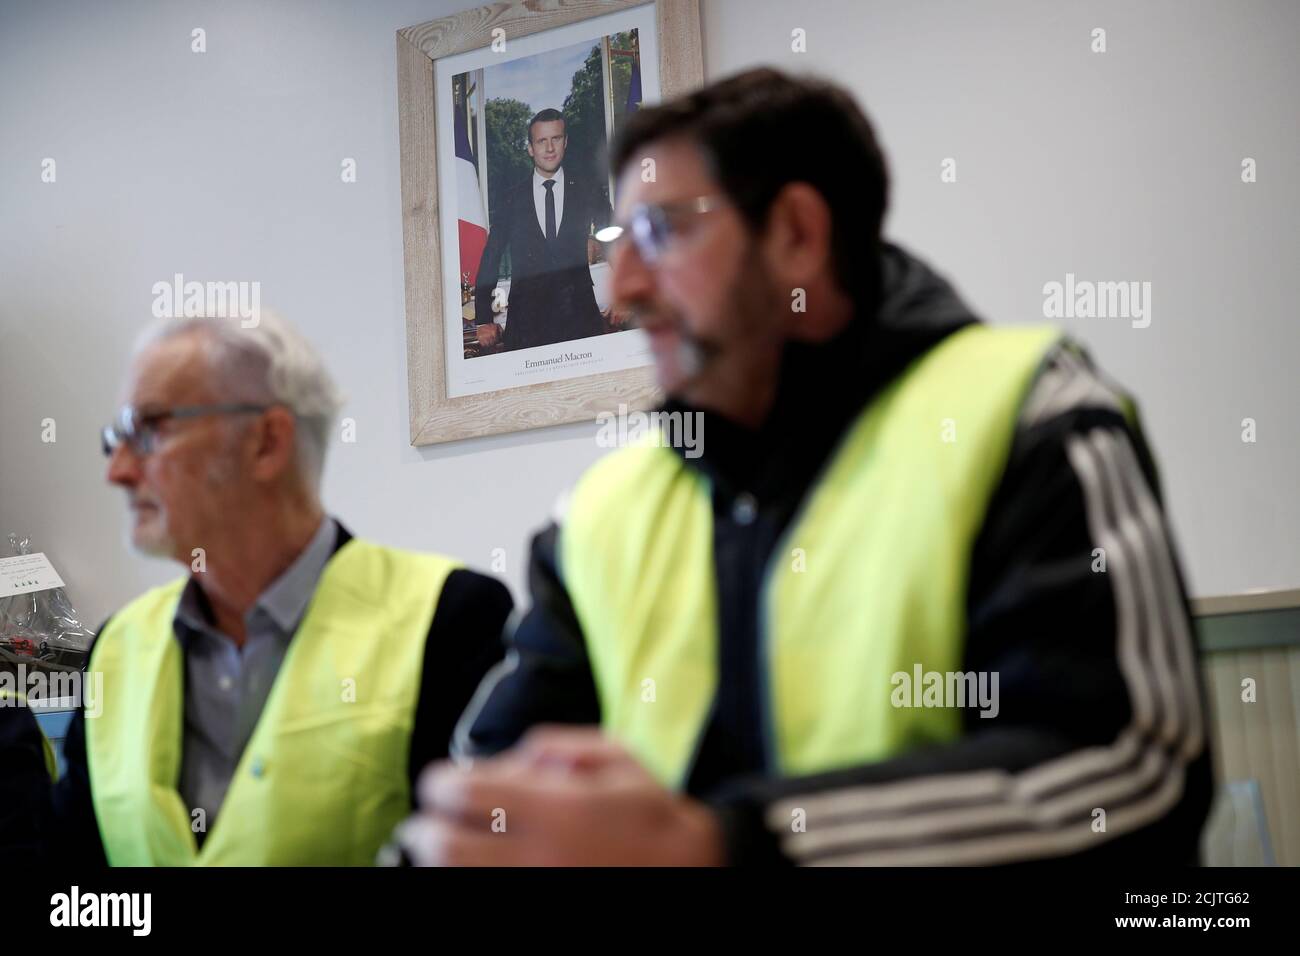 Yellow vests movement members Myrtil Devillers and Giles Piat attend a meeting at the city hall in Flagy, France, January 9, 2019. On the wall, the official portrait of French President Emmanuel Macron. Picture taken January 9, 2019.  REUTERS/Benoit Tessier Stock Photo